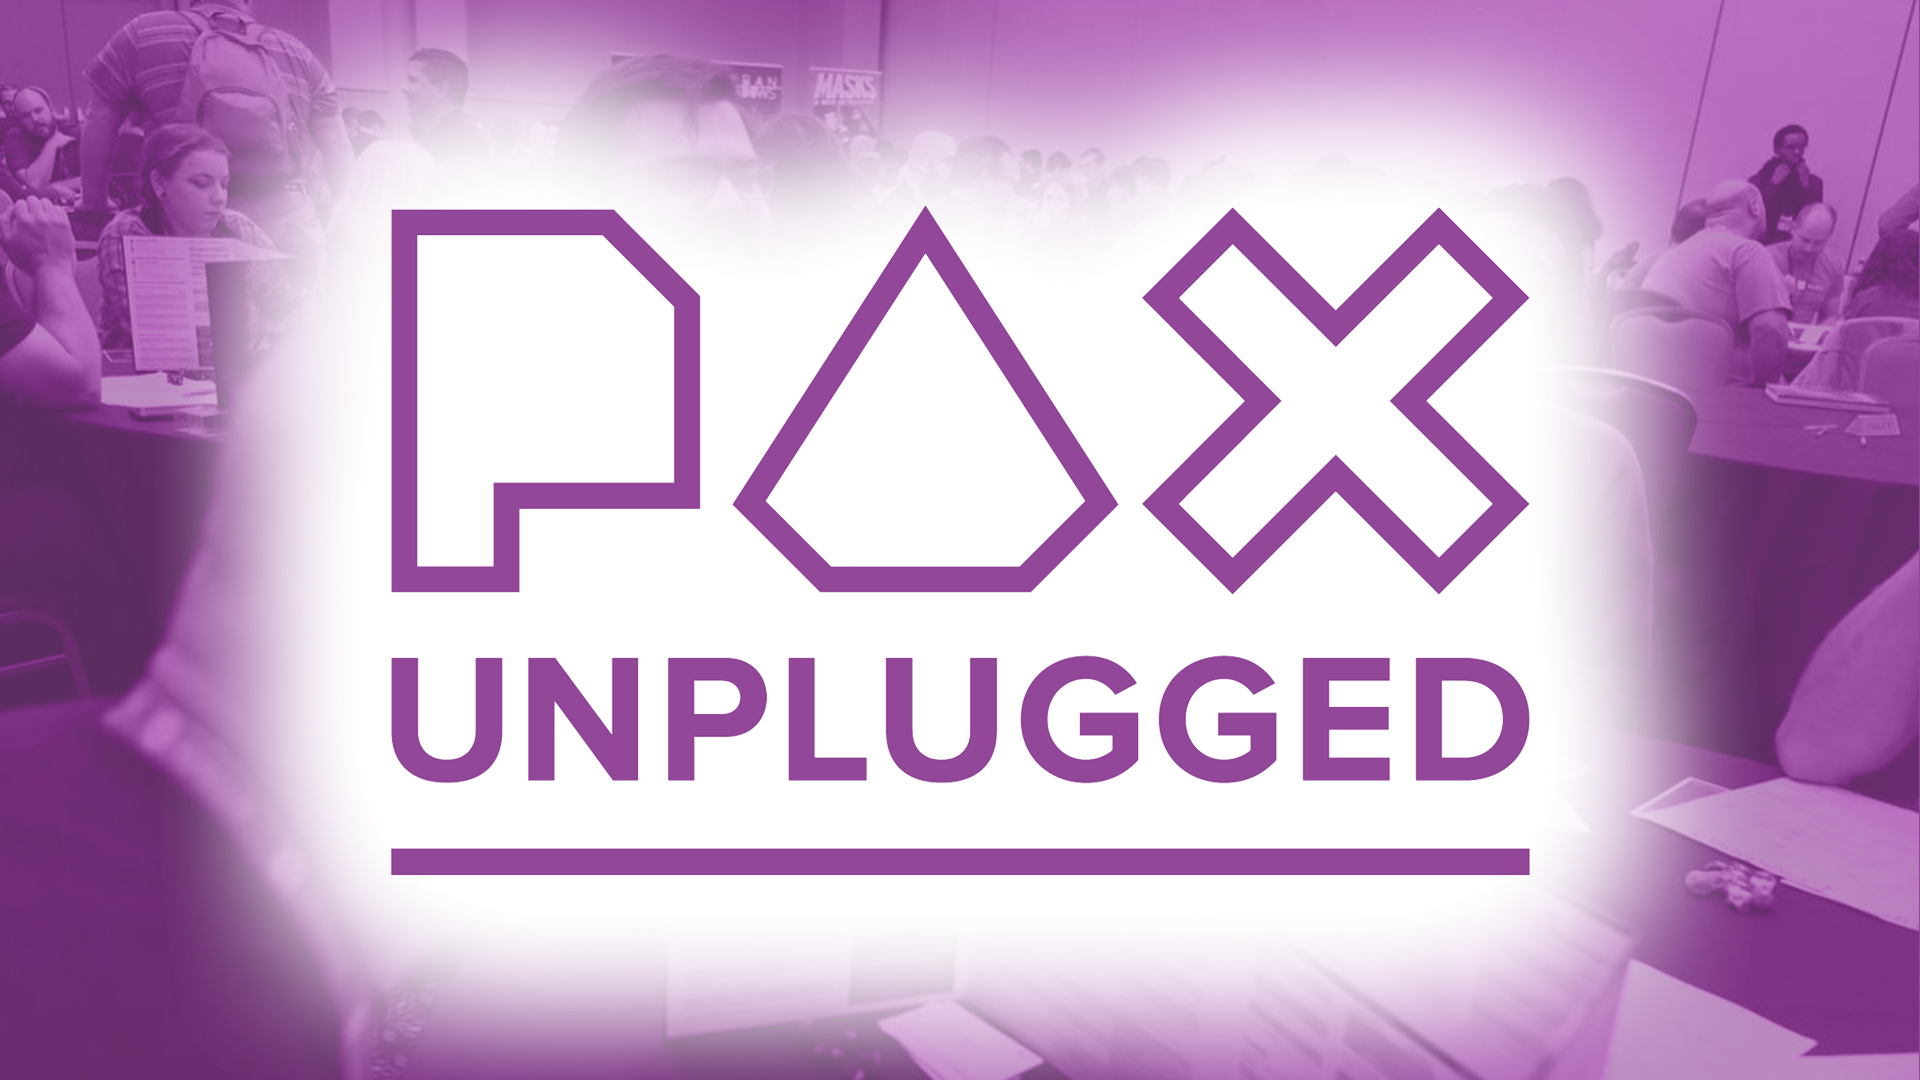 PAX Unplugged - The Biggest Tabletop Gaming Convention Returns - BunnyGaming.com